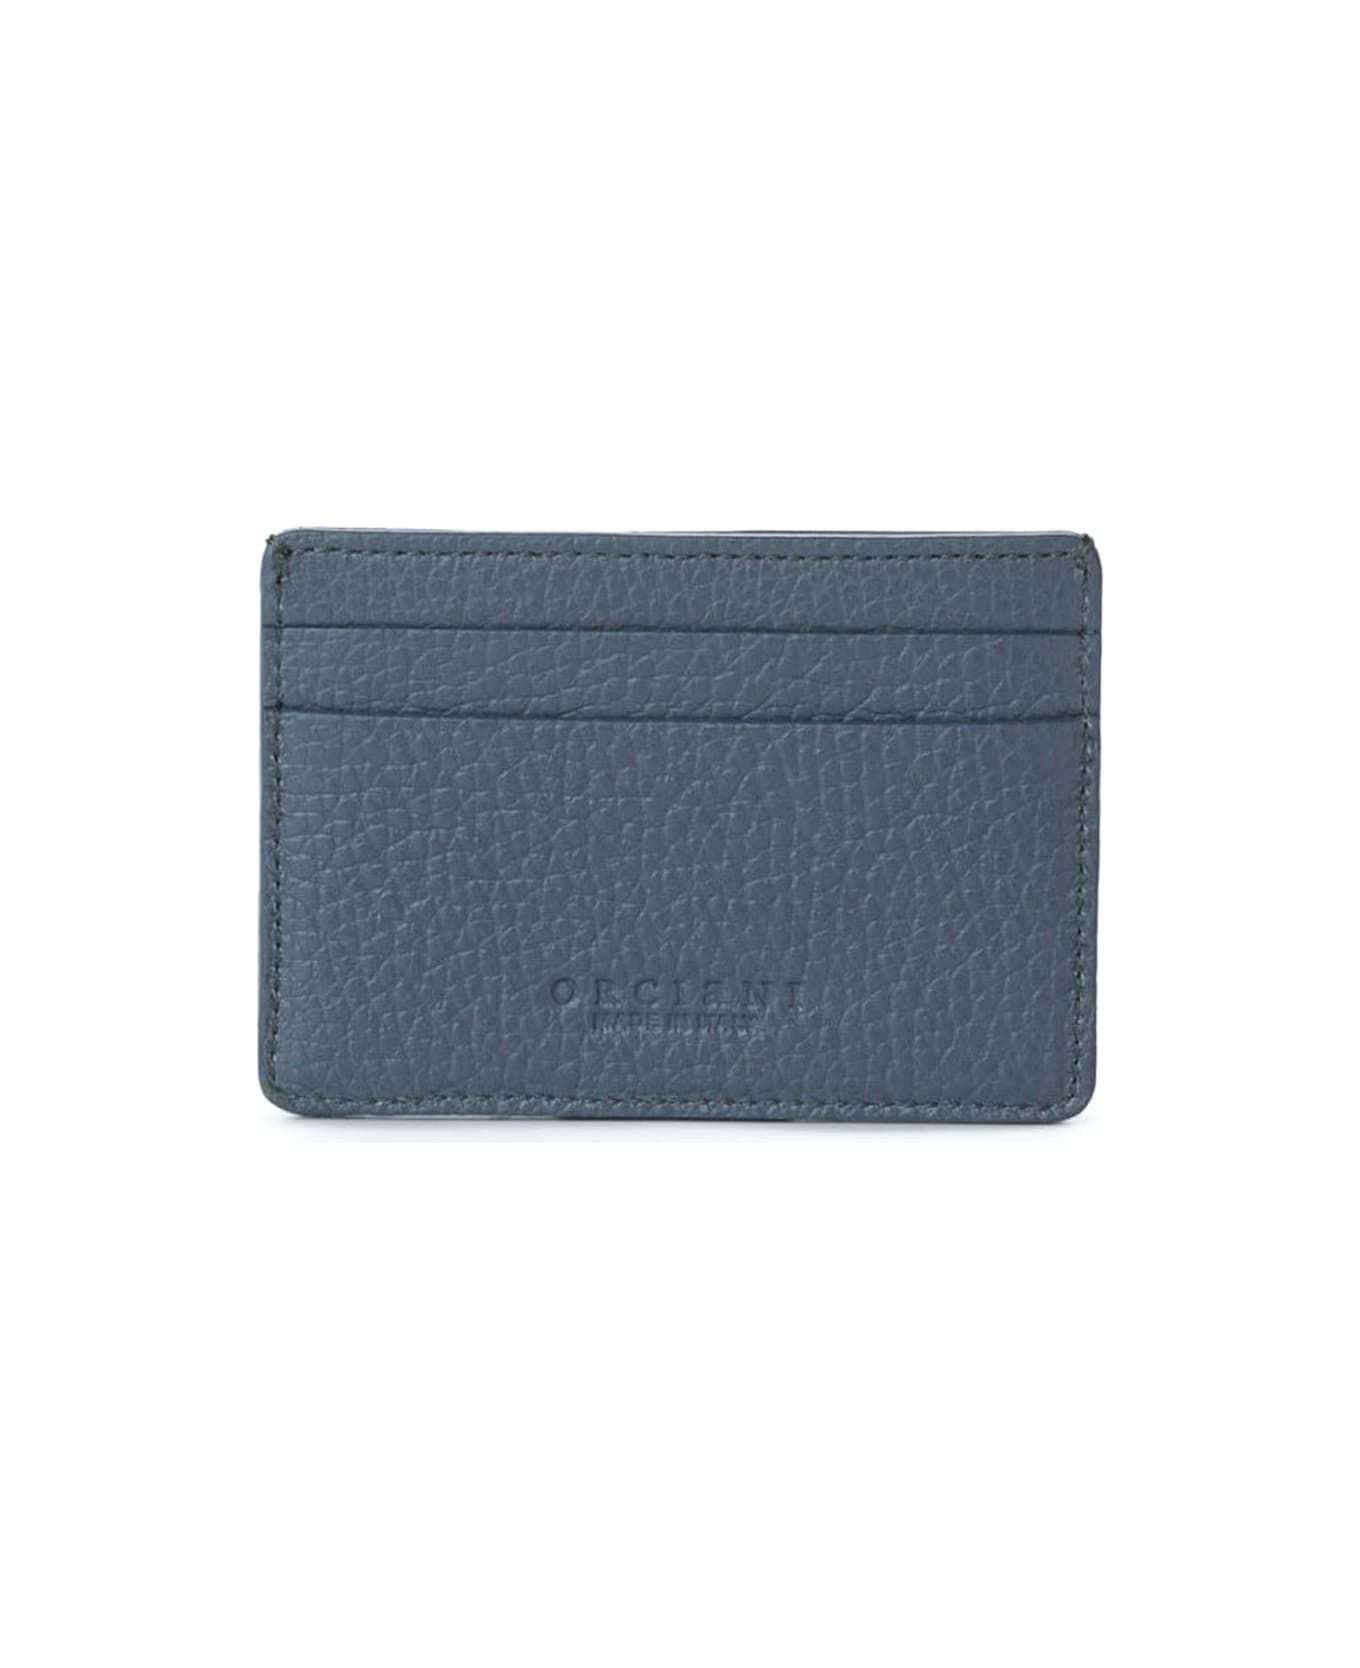 Orciani Micron Leather Card Holder - Blue